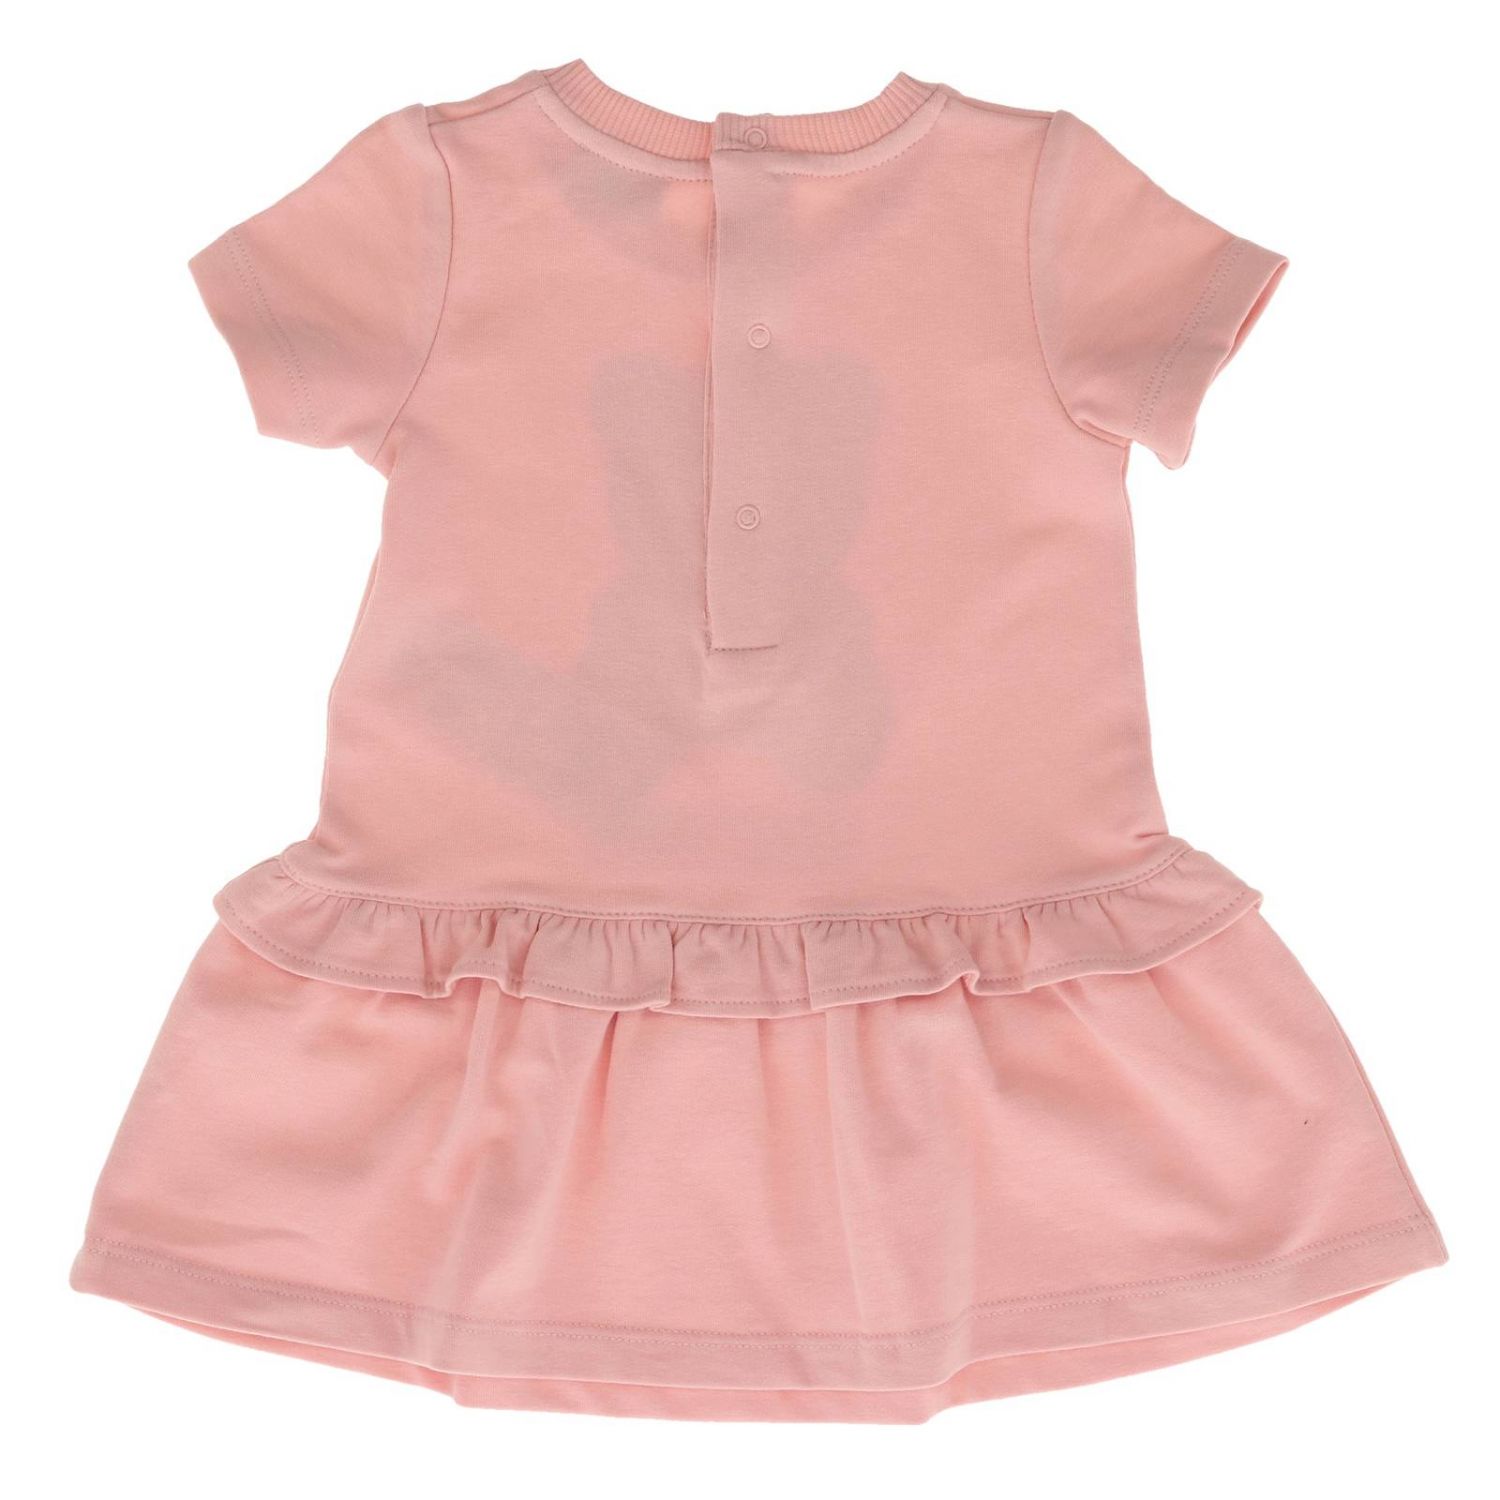 Moschino Baby Outlet: Dress kids - Pink | Dress Moschino Baby MDV074 ...